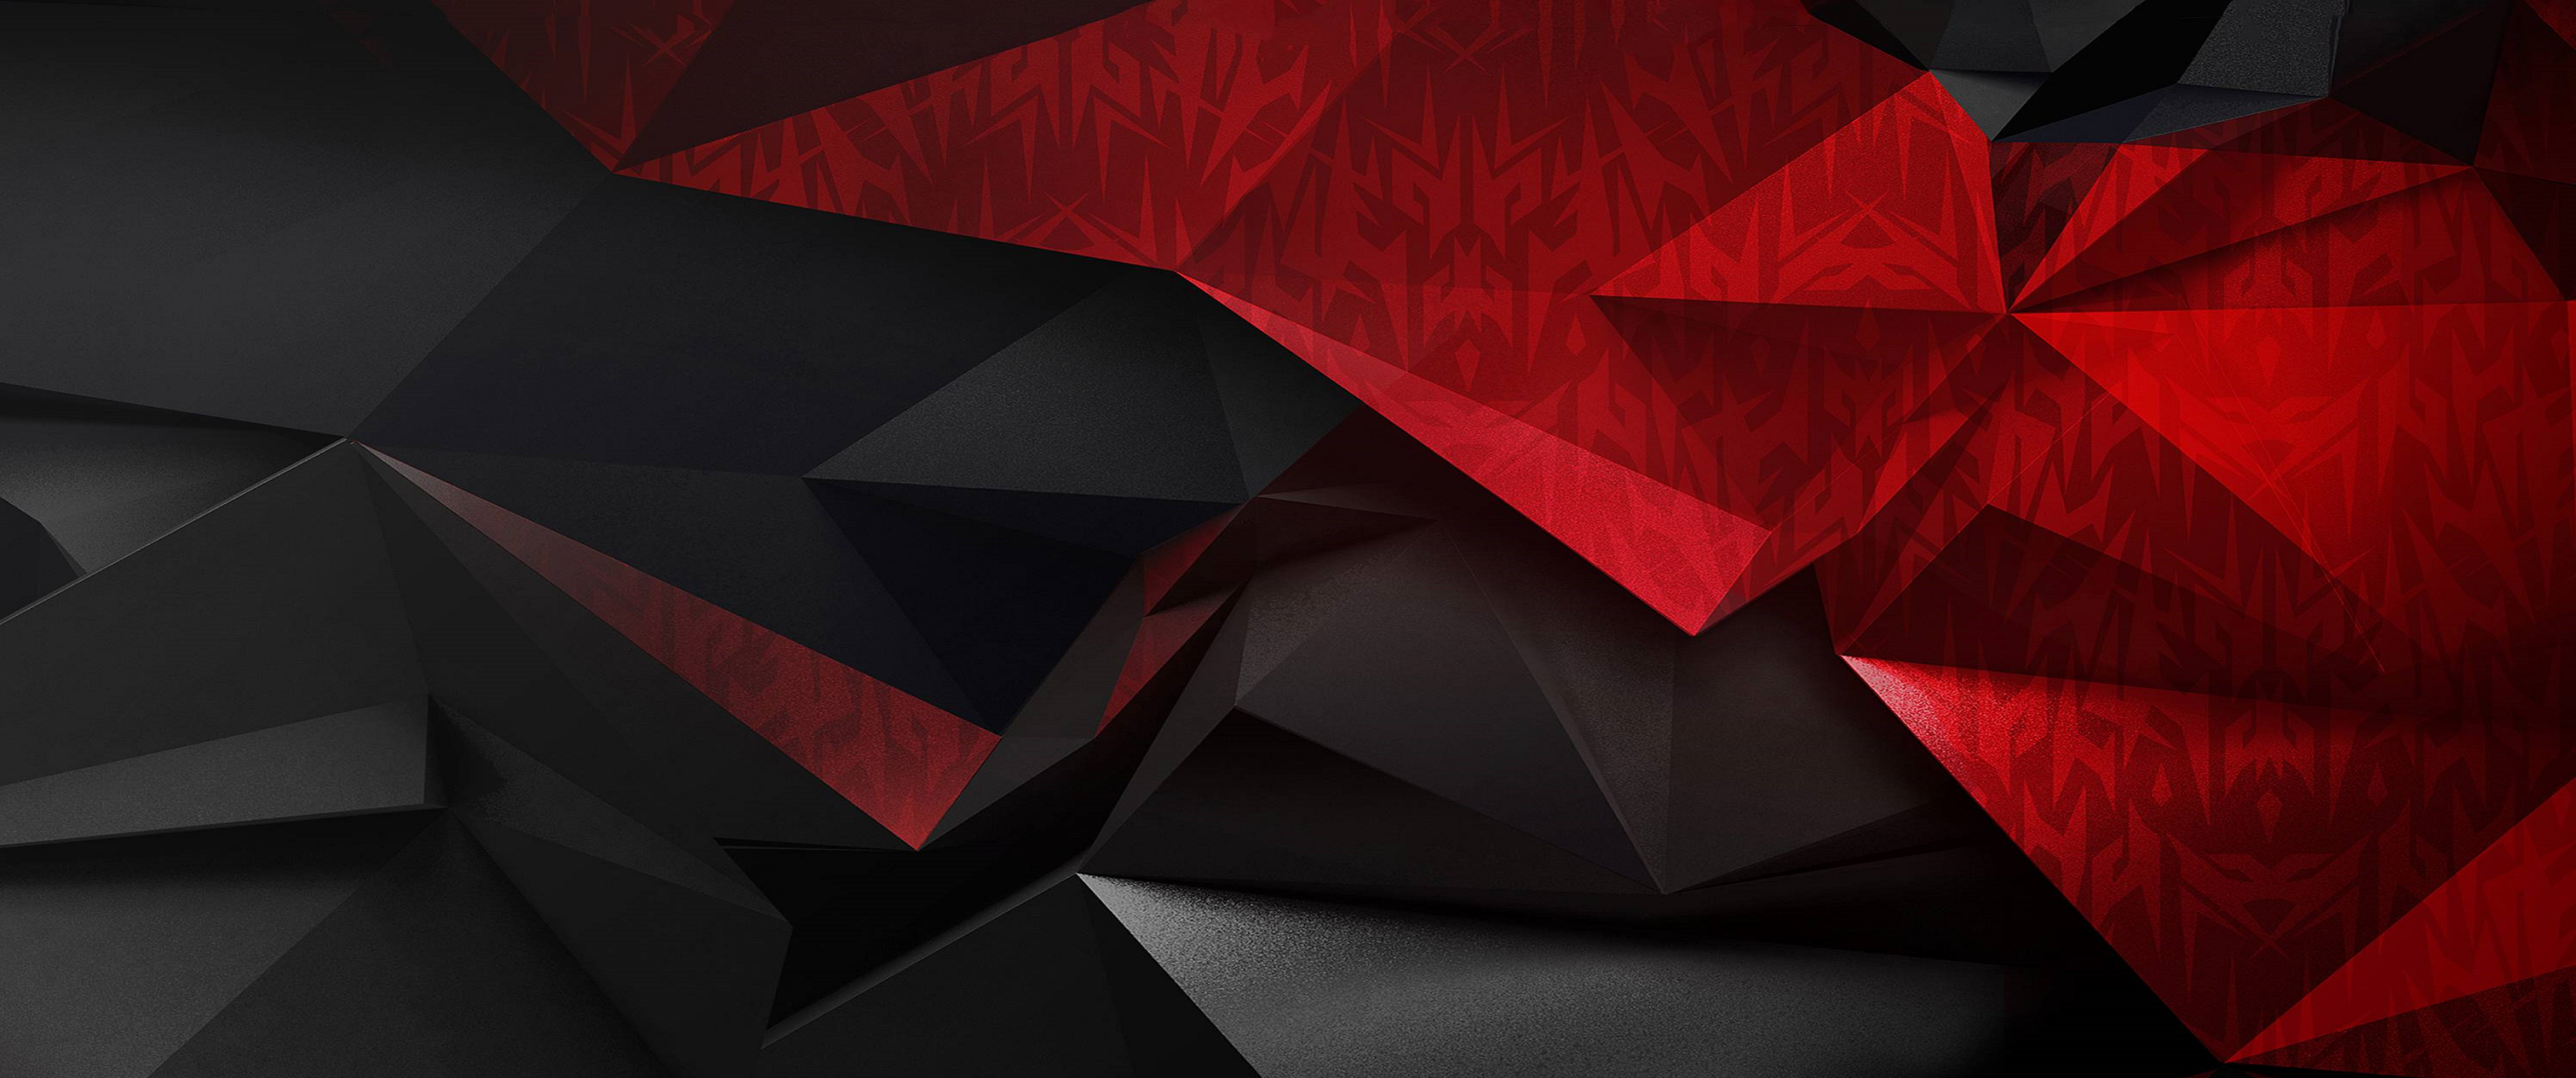 Acer Abstract Red Black Digital Art Geometry 3440x1440